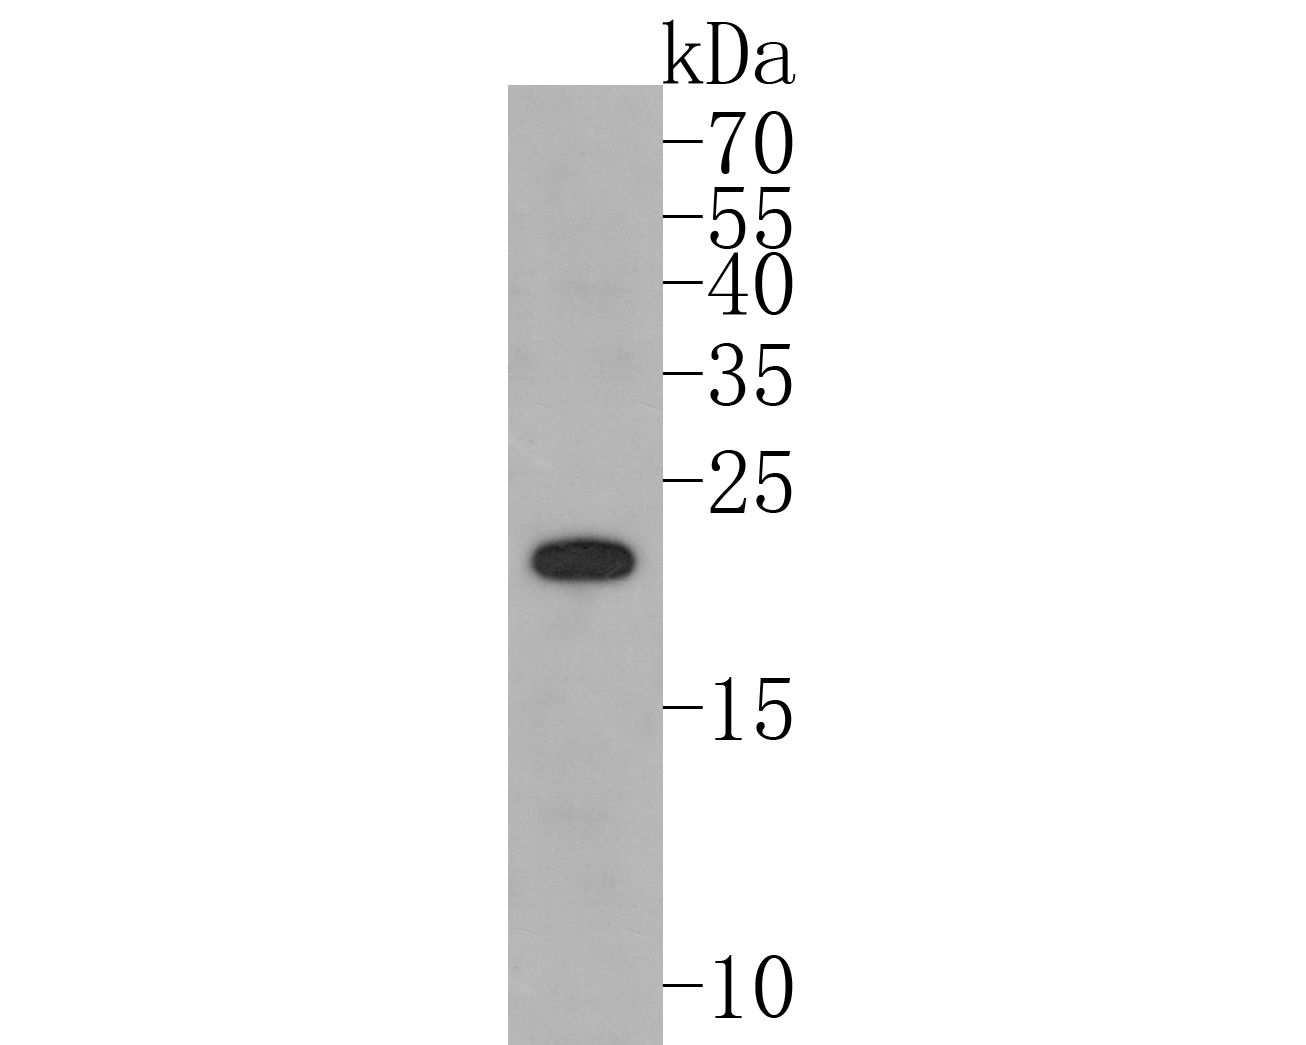 Western blot analysis of PMP22 on PC-12 cell lysates. Proteins were transferred to a PVDF membrane and blocked with 5% BSA in PBS for 1 hour at room temperature. The primary antibody (ET1705-15, 1/500) was used in 5% BSA at room temperature for 2 hours. Goat Anti-Rabbit IgG - HRP Secondary Antibody (HA1001) at 1:5,000 dilution was used for 1 hour at room temperature.